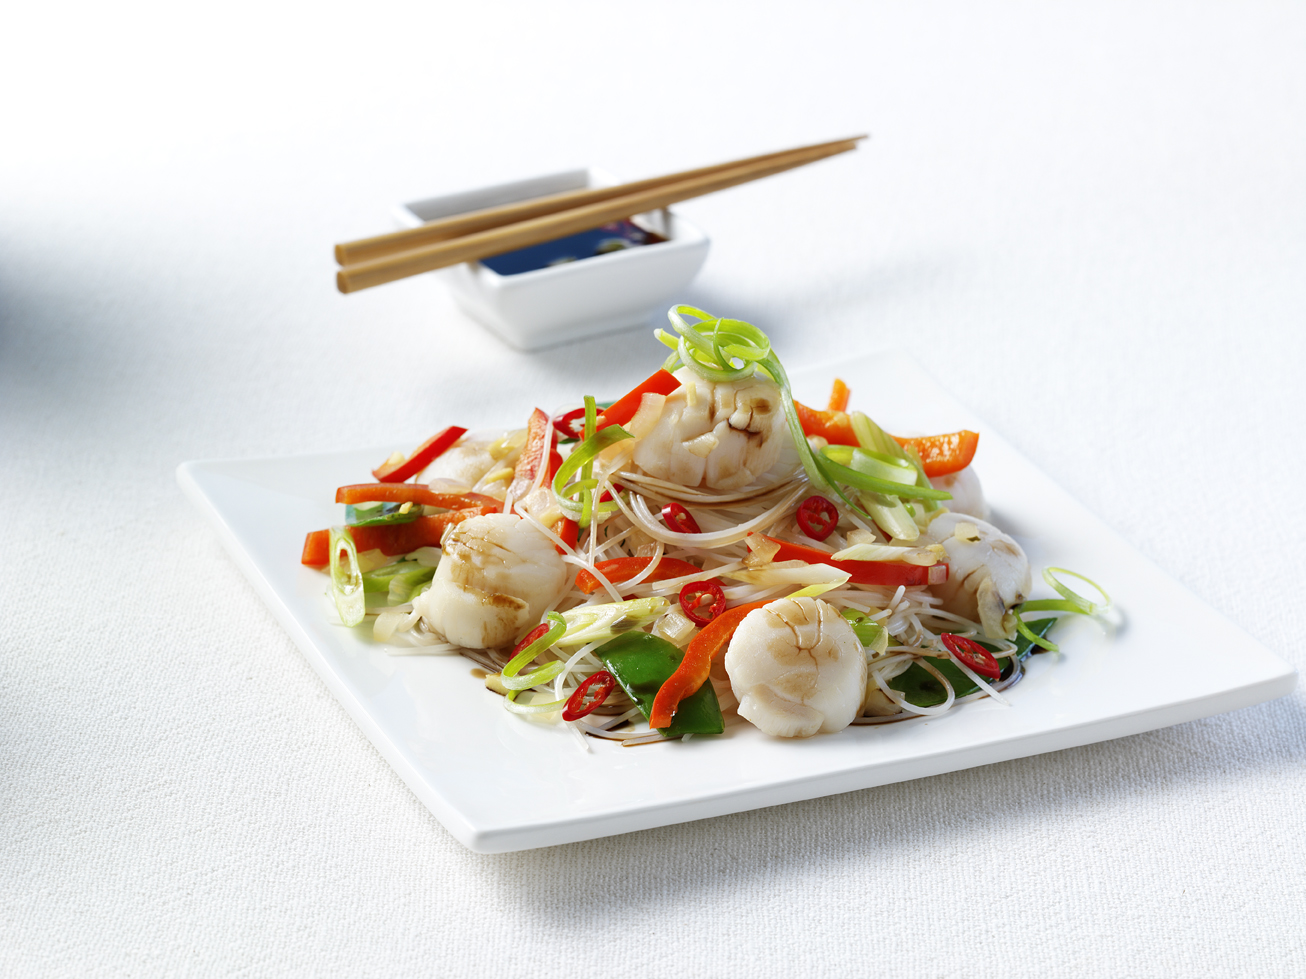 Dinner recipes: Chilli scallop and noodles